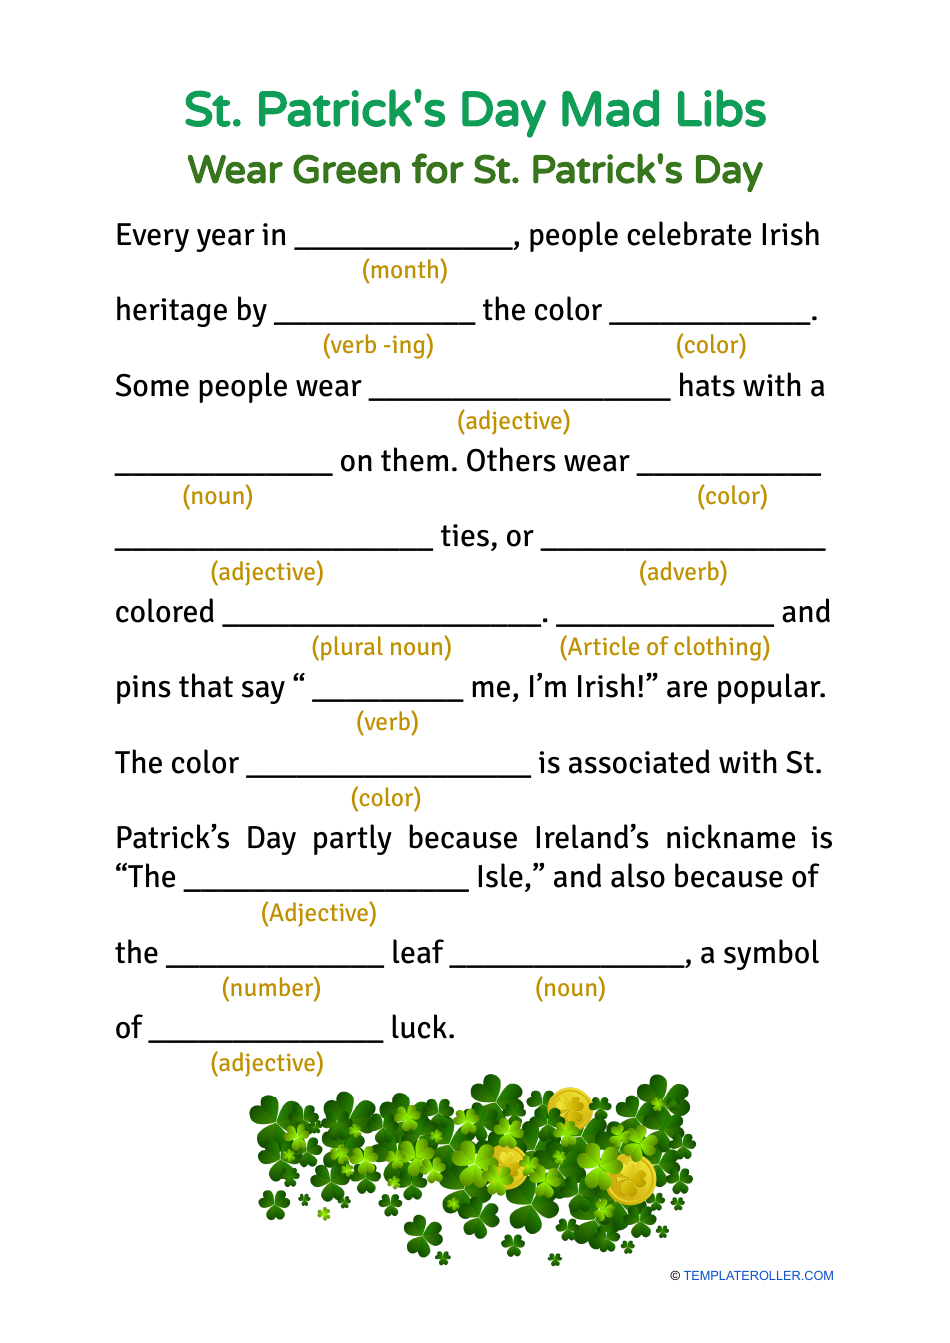 St Patrick s Day Mad Libs Wear Green Download Printable PDF